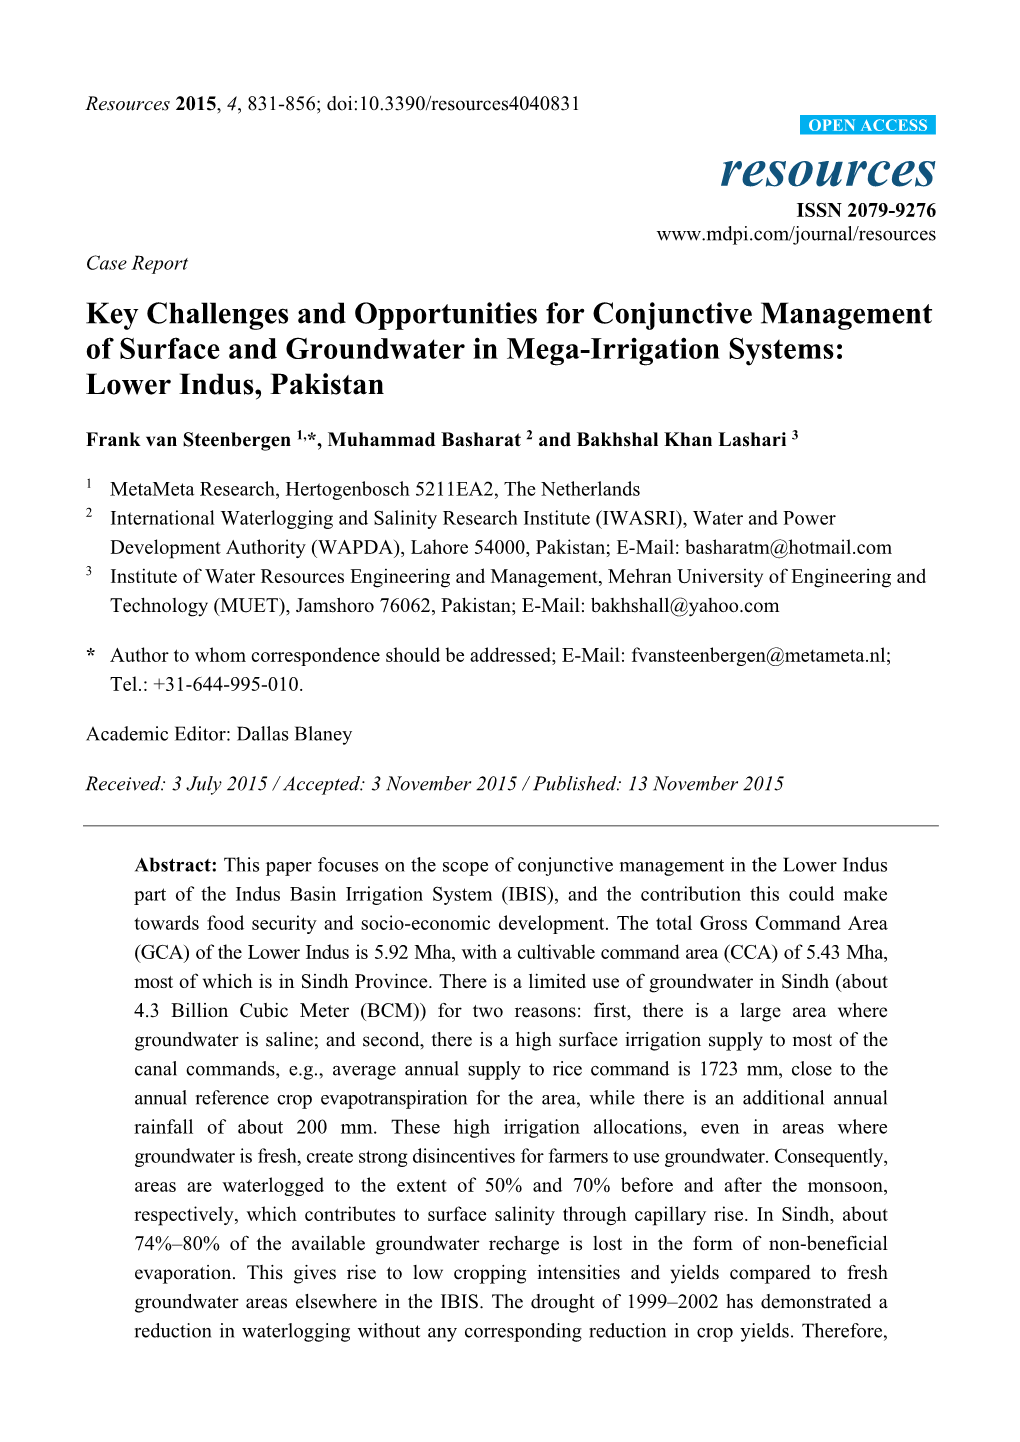 Key Challenges and Opportunities for Conjunctive Management of Surface and Groundwater in Mega-Irrigation Systems: Lower Indus, Pakistan